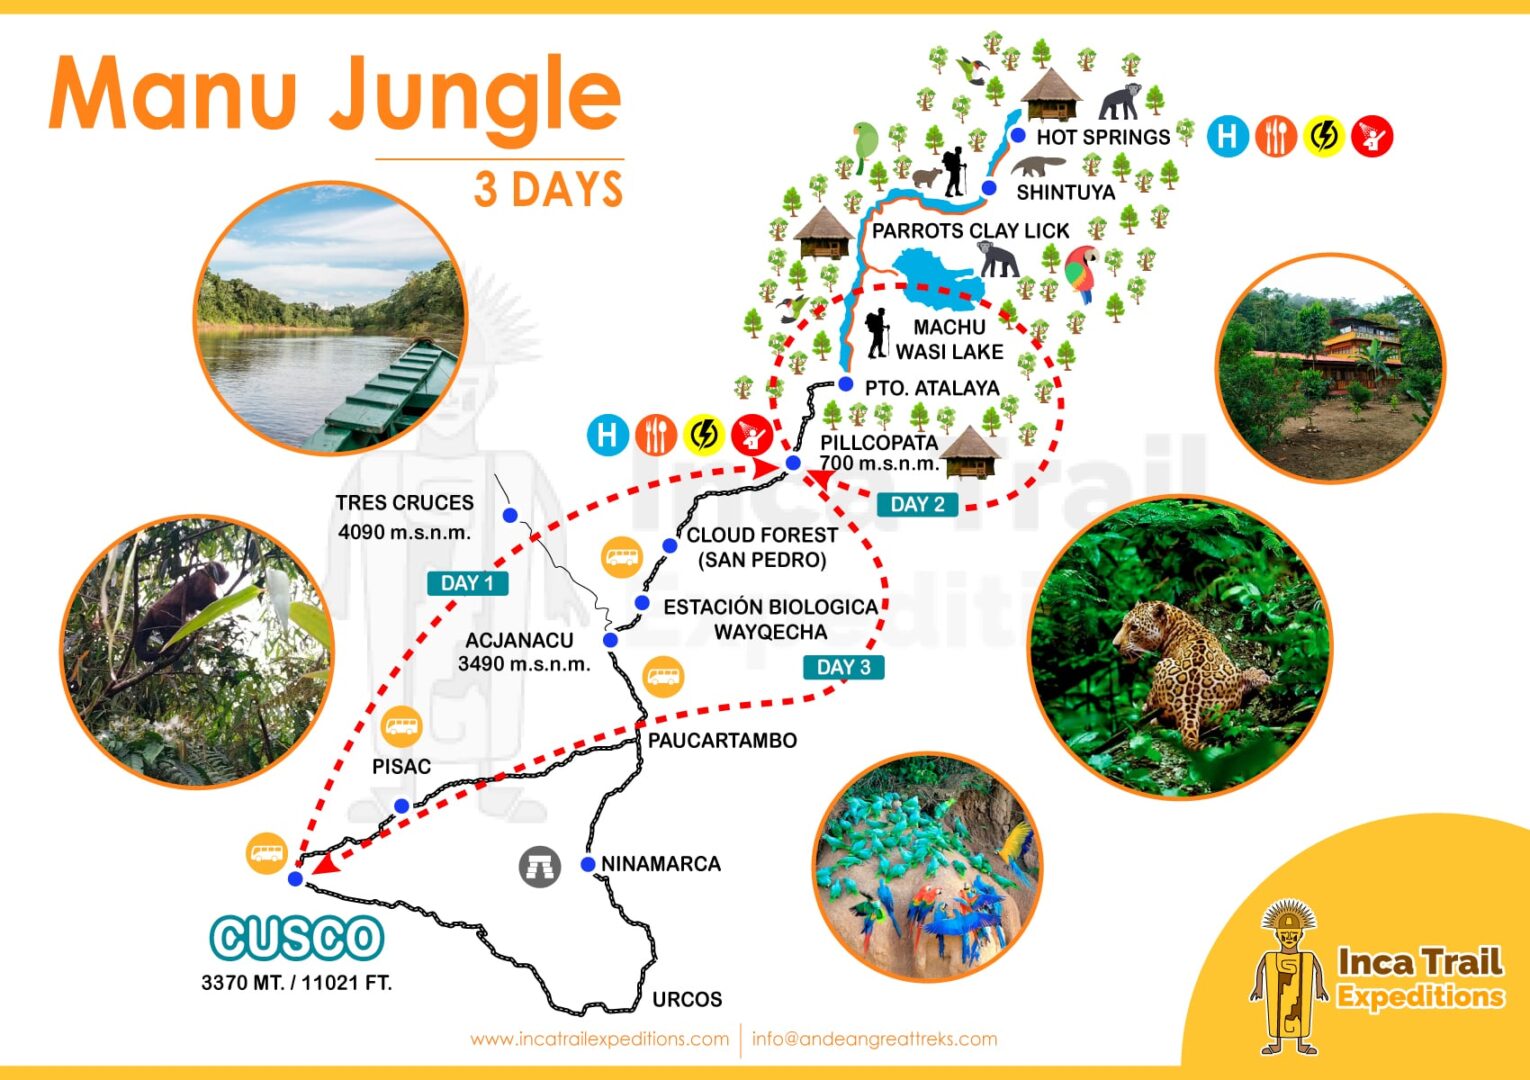 MANU-JUNGLE-3-DAYS-BY-INCA-TRAIL-EXPEDITIONS